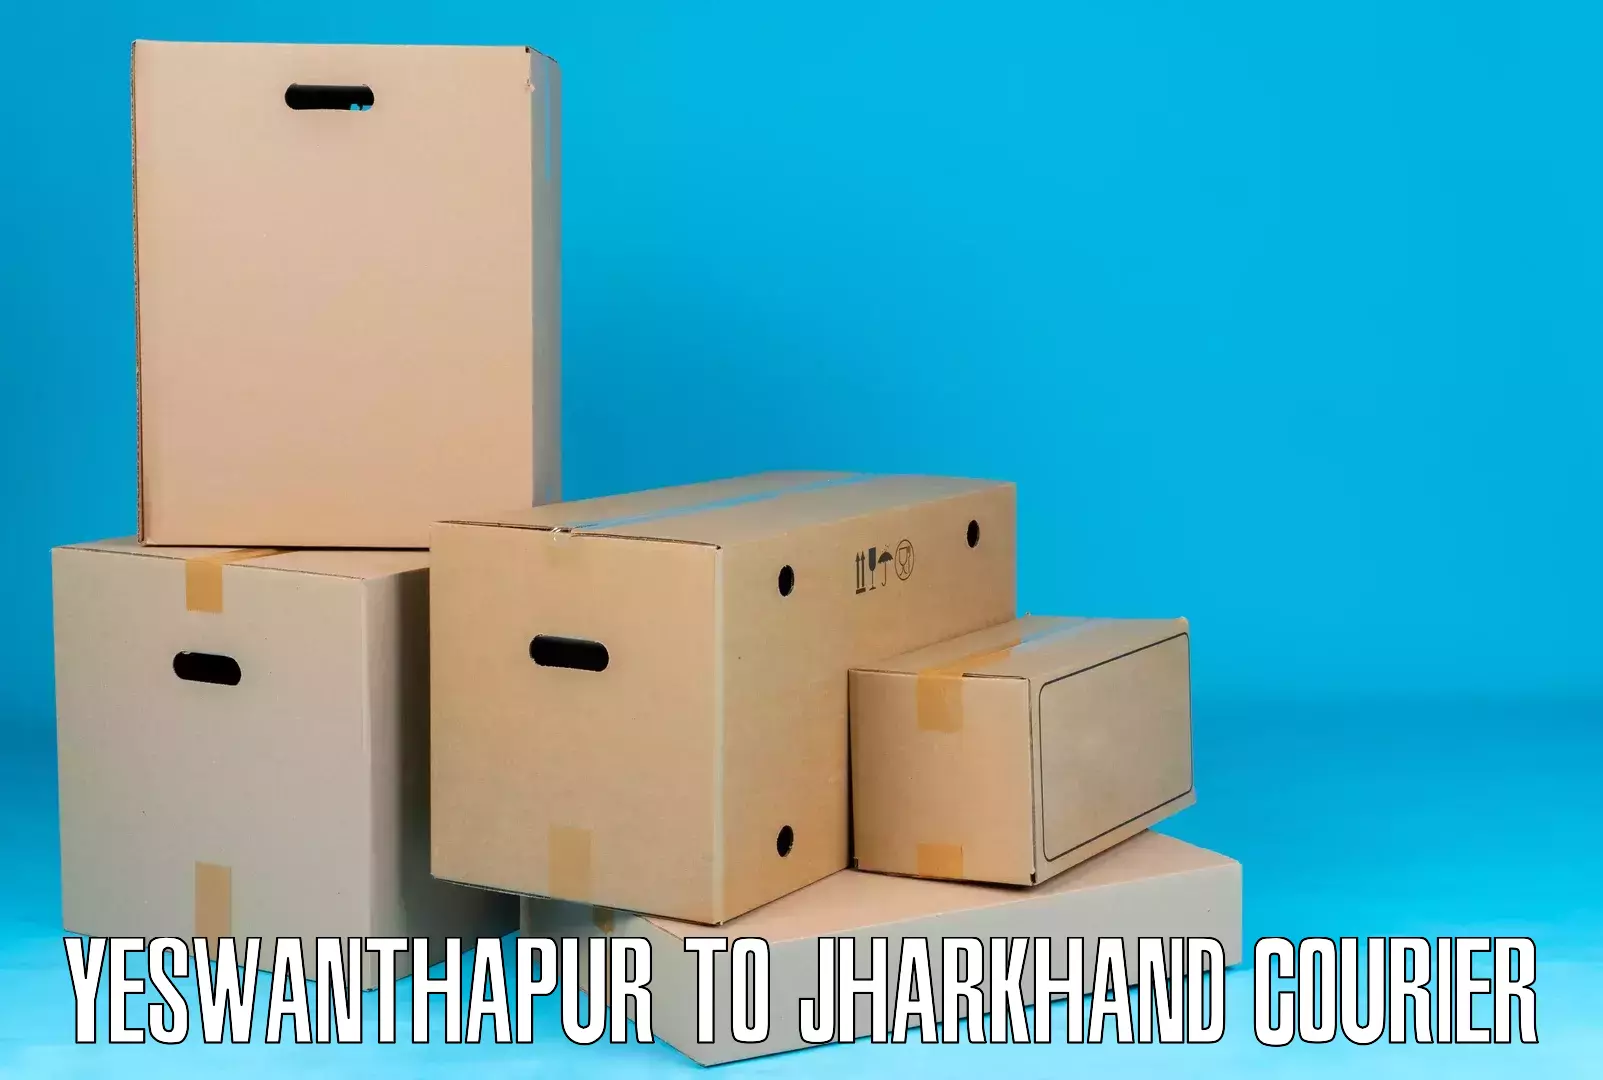 Global shipping solutions Yeswanthapur to Hazaribagh